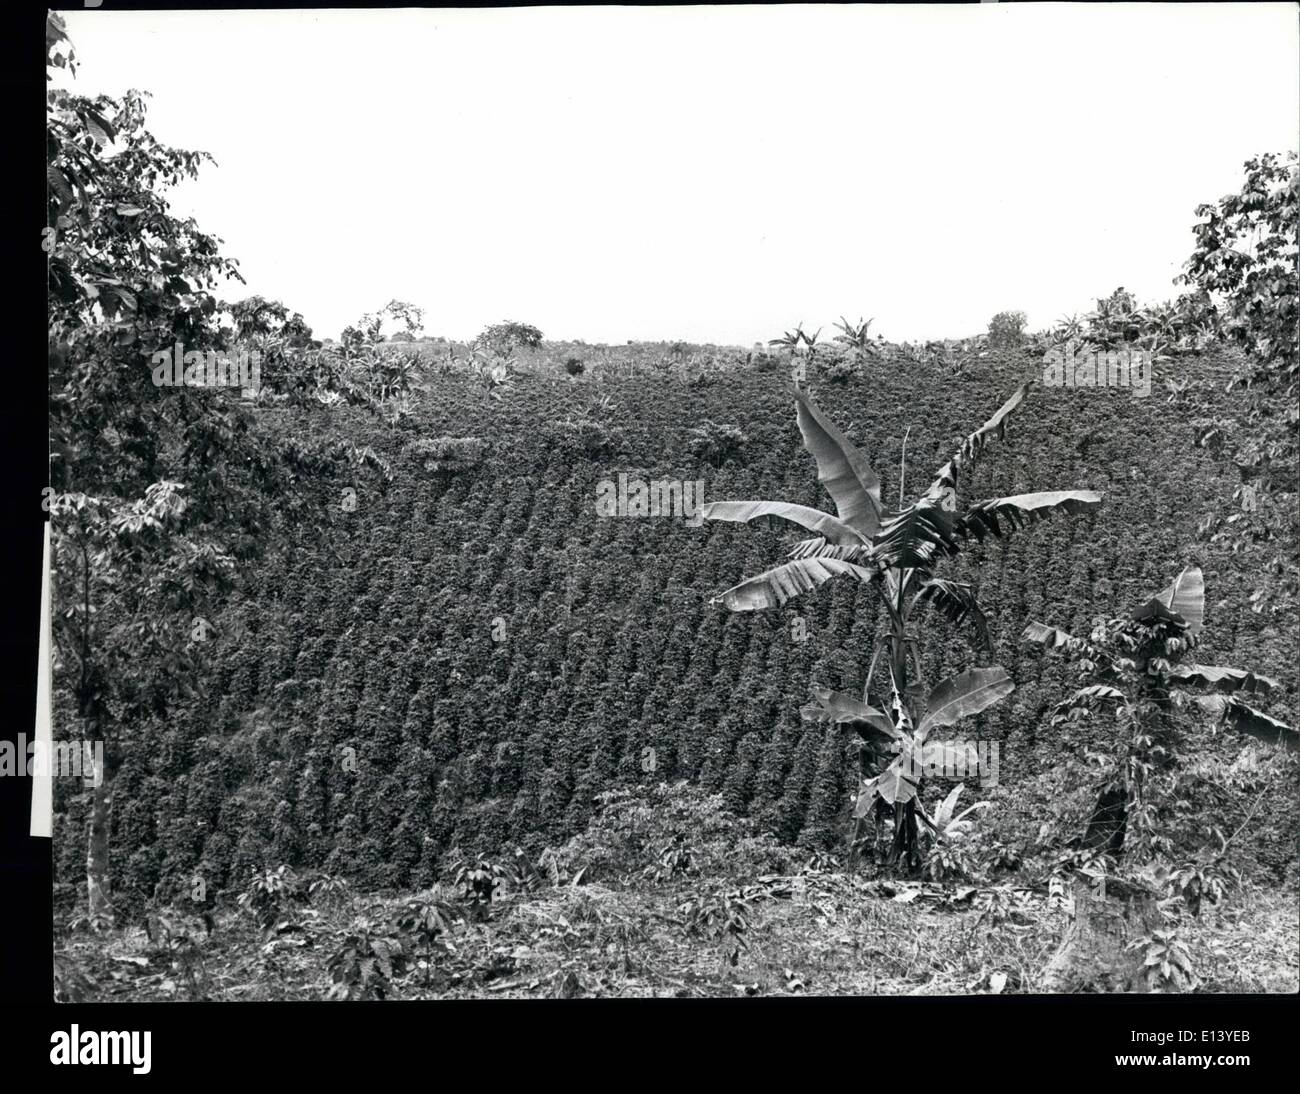 Mar. 27, 2012 - Hillsides in the Provinces of Columbia are flooded with coffee bushes, as the photographs show thousands of pounds ready for export. Stock Photo